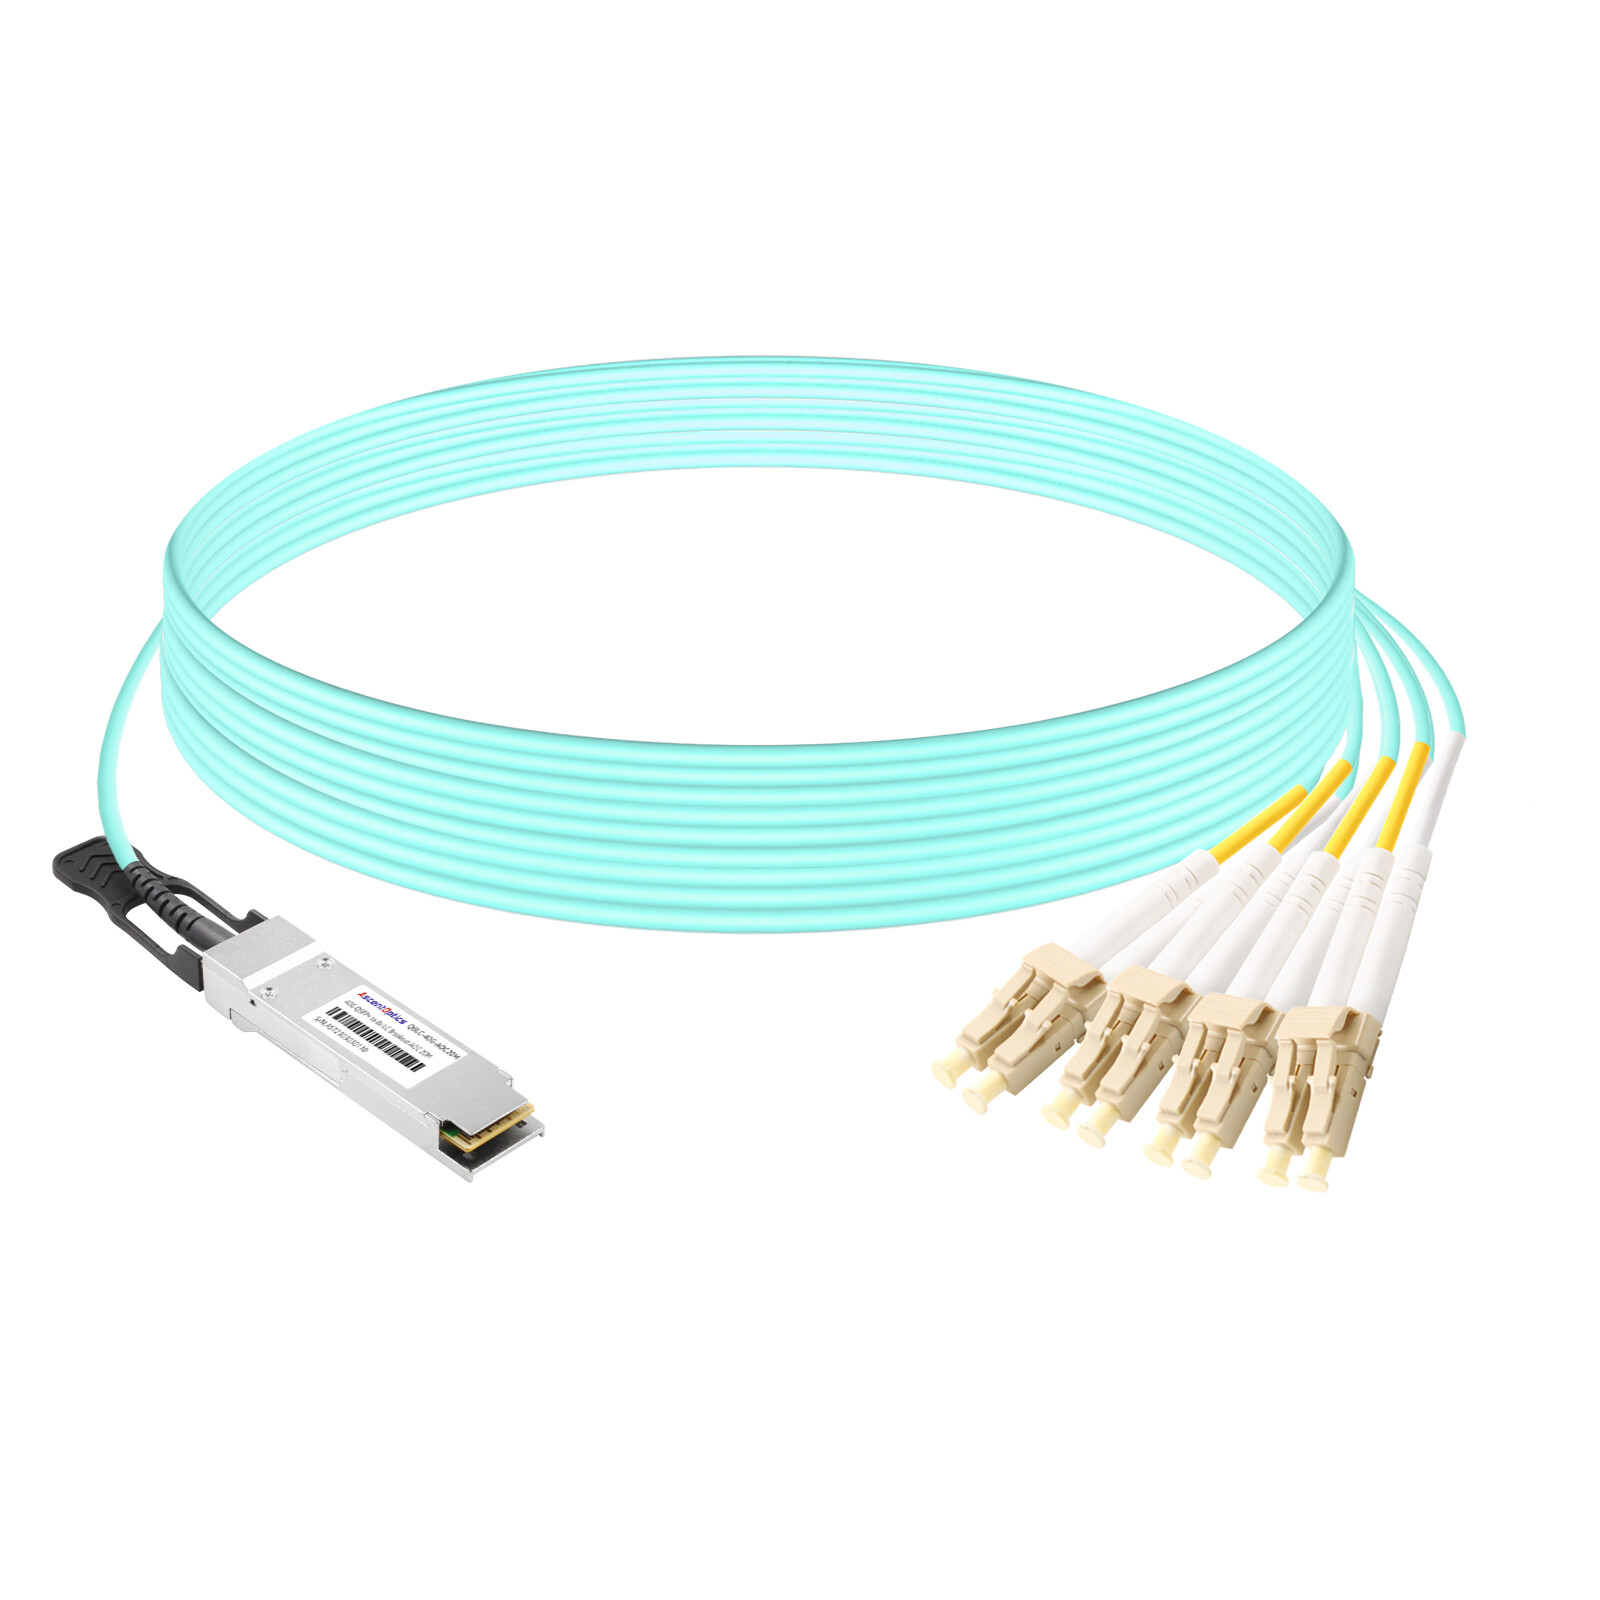 40G QSFP+ to 8x LC Breakout AOC Cable,20 Meters